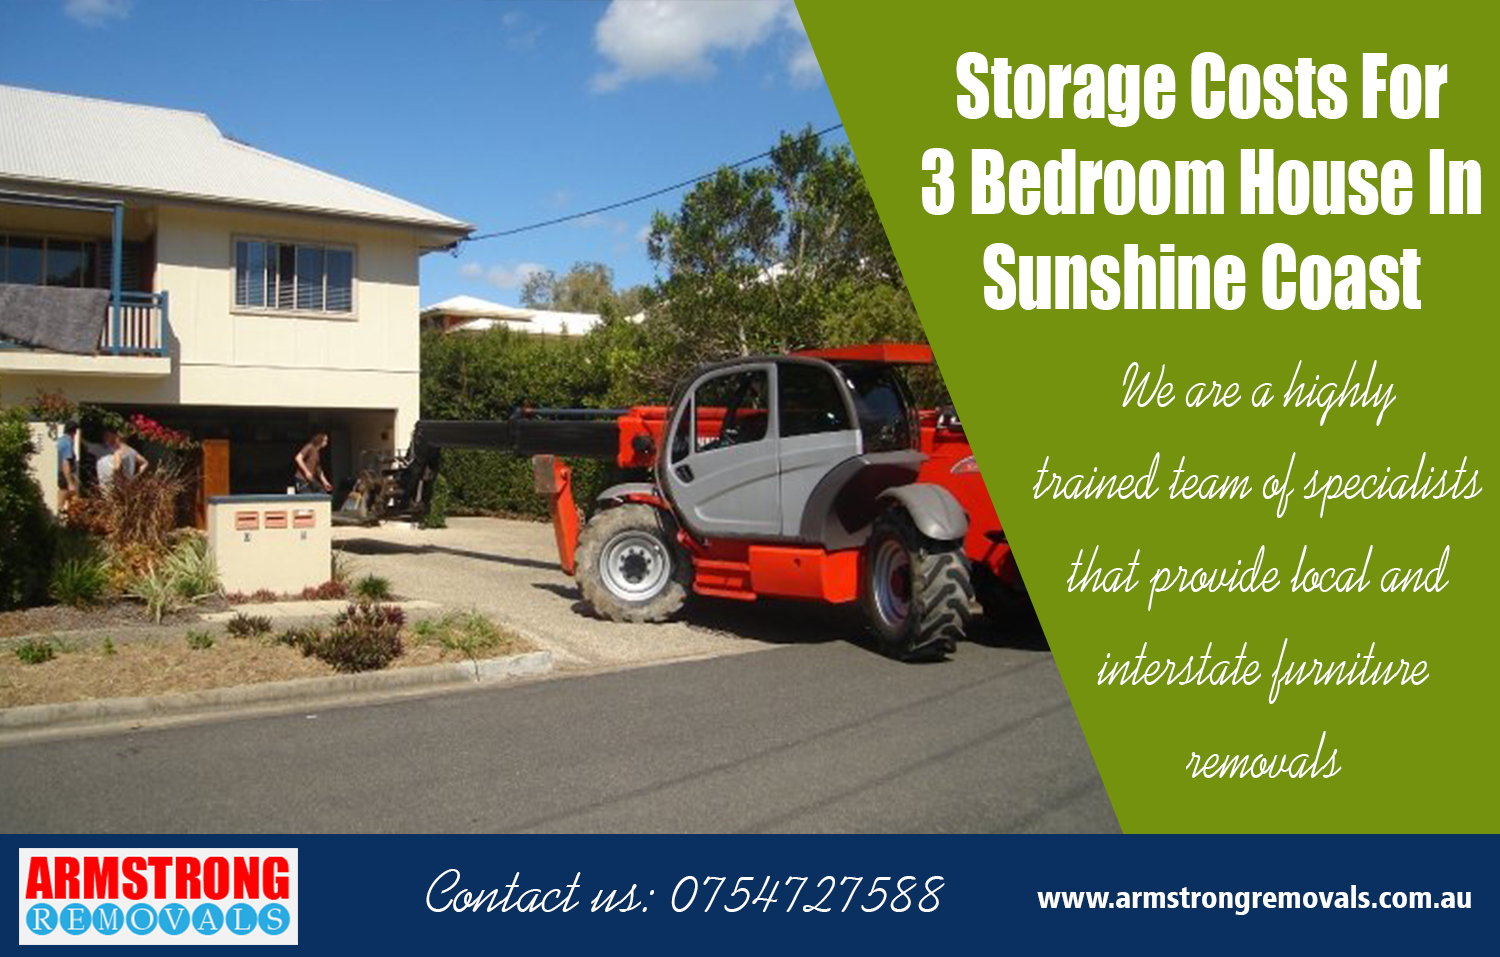 Storage Costs For 3 Bedroom House In Sunshine Coast